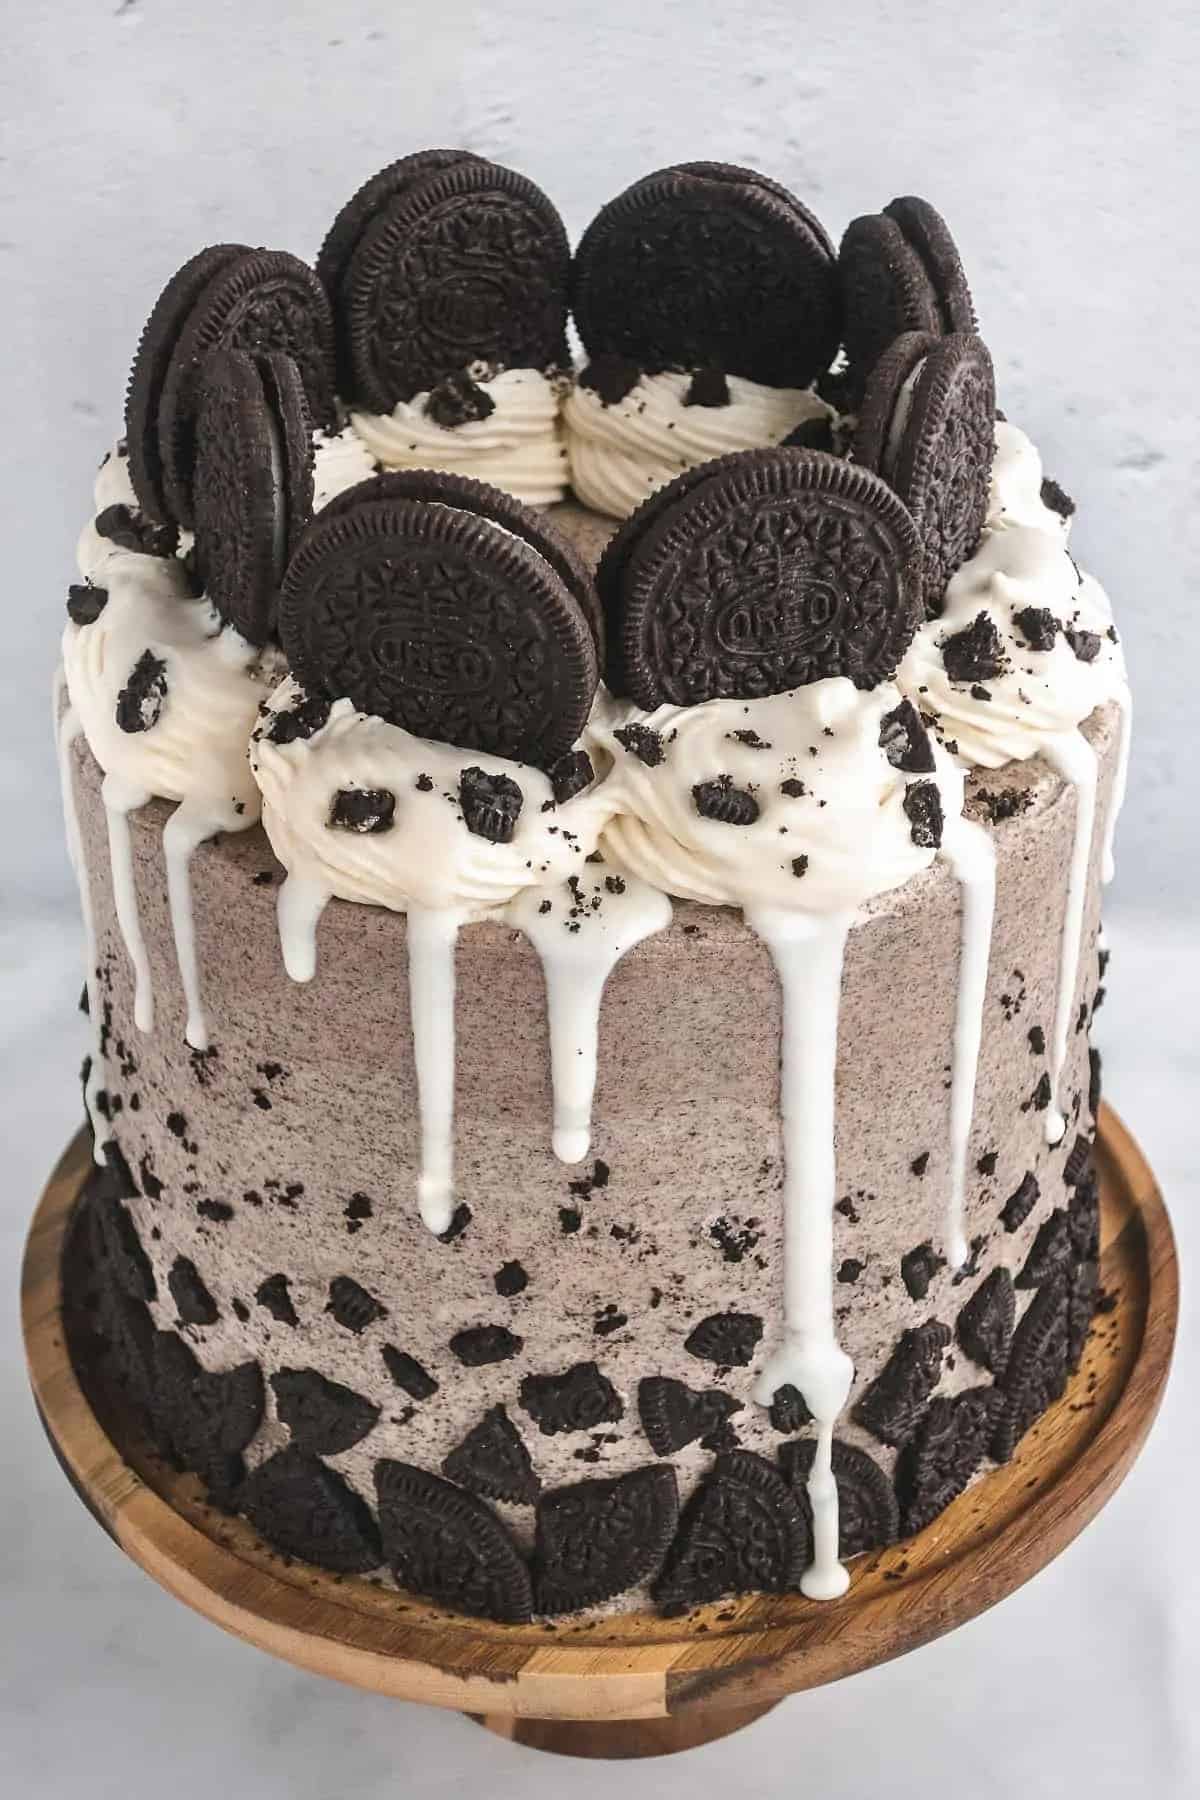 A delectable oreo cake adorned with luscious icing and garnished with crumbled cookies on top.